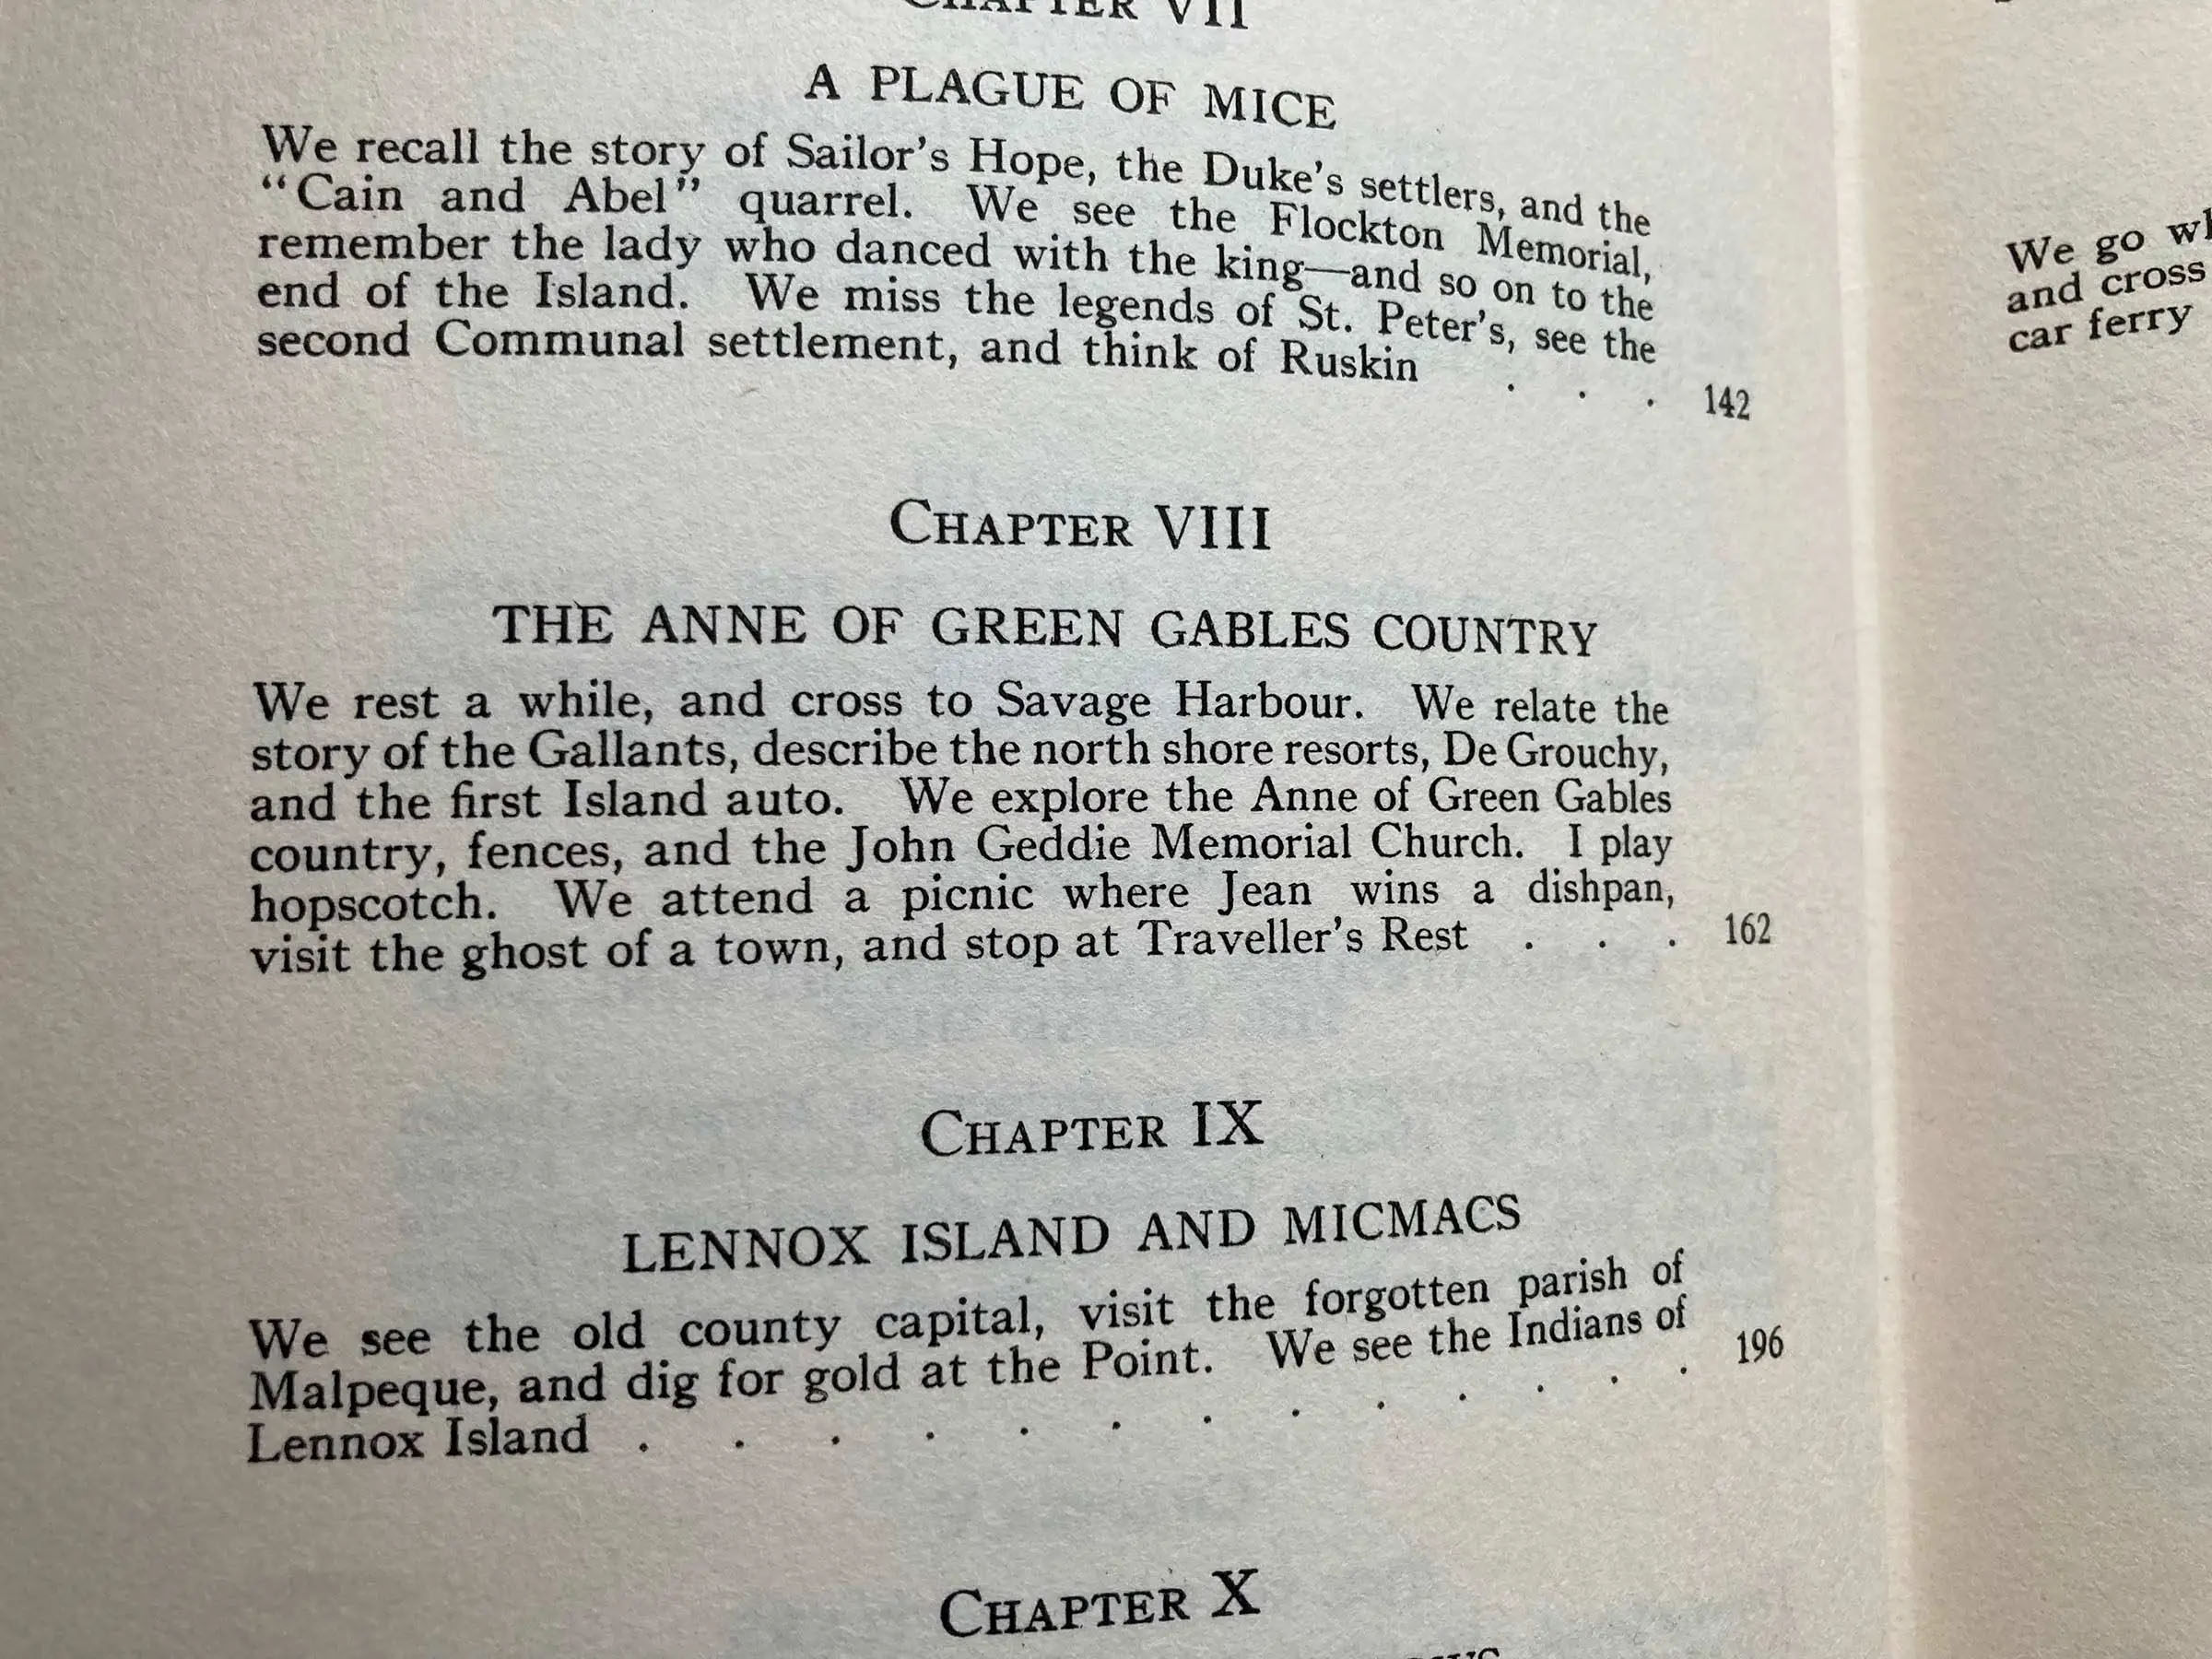 close-up image of a book's table of contents, centering a chapter on "The Anne of Green Gables Country"